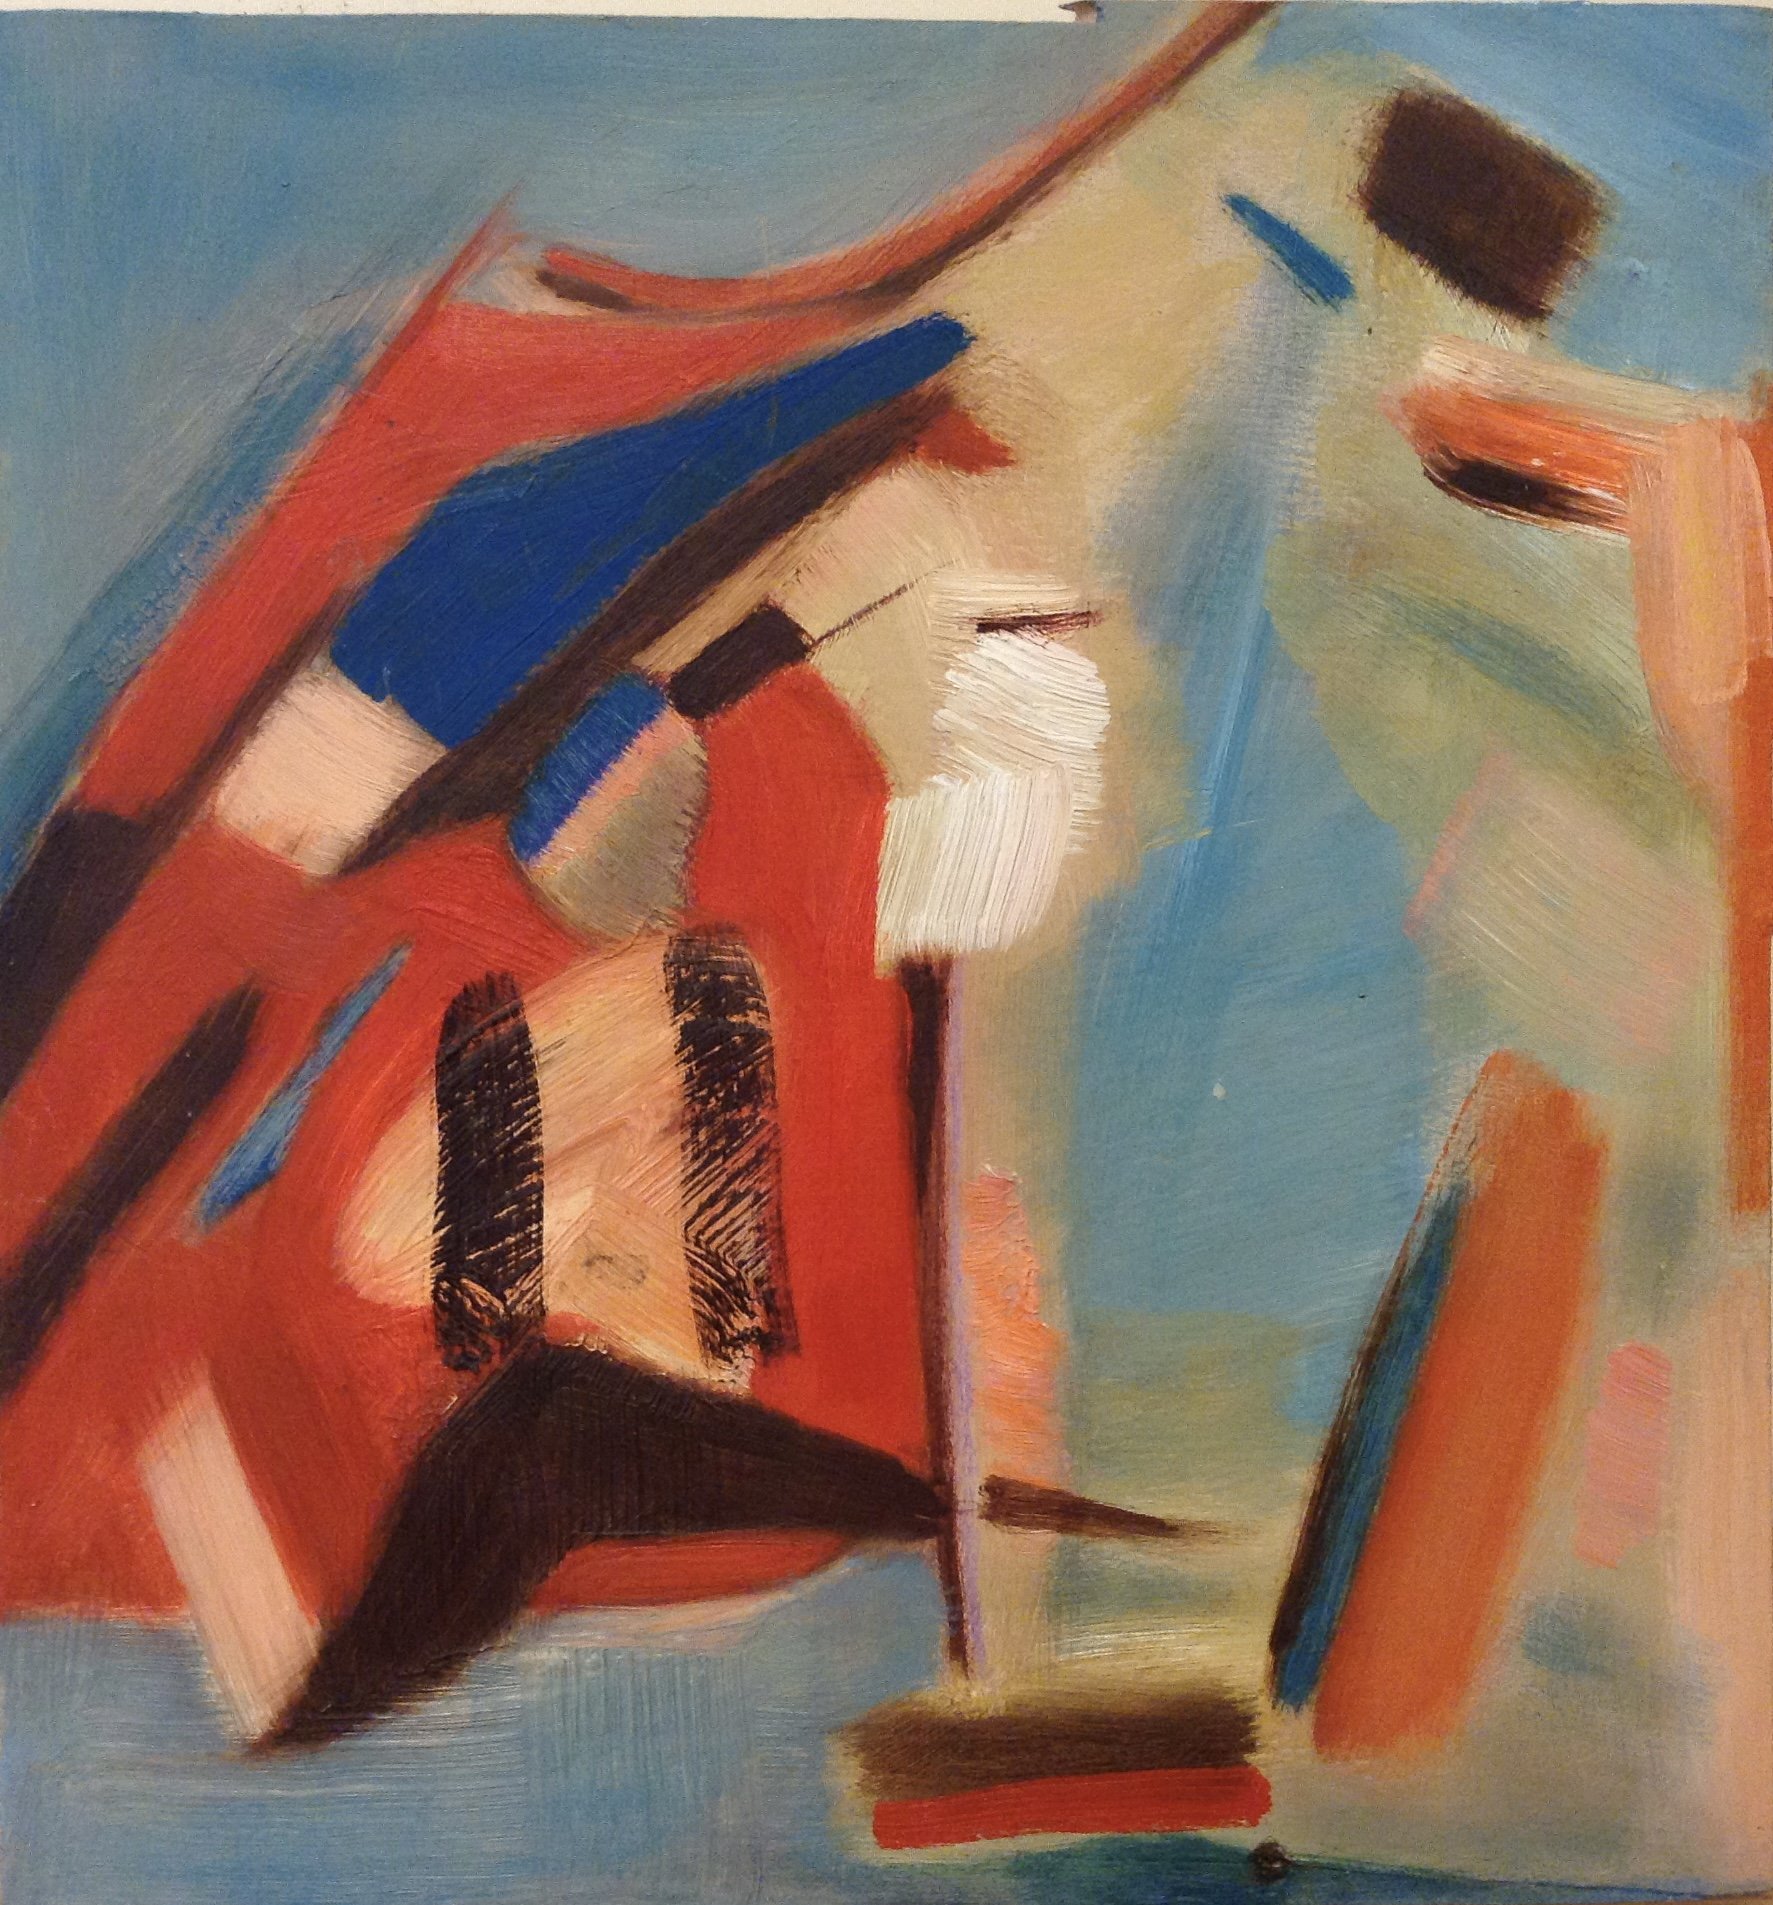    Abstract 4  - oil on board, 10” x 11” SOLD  